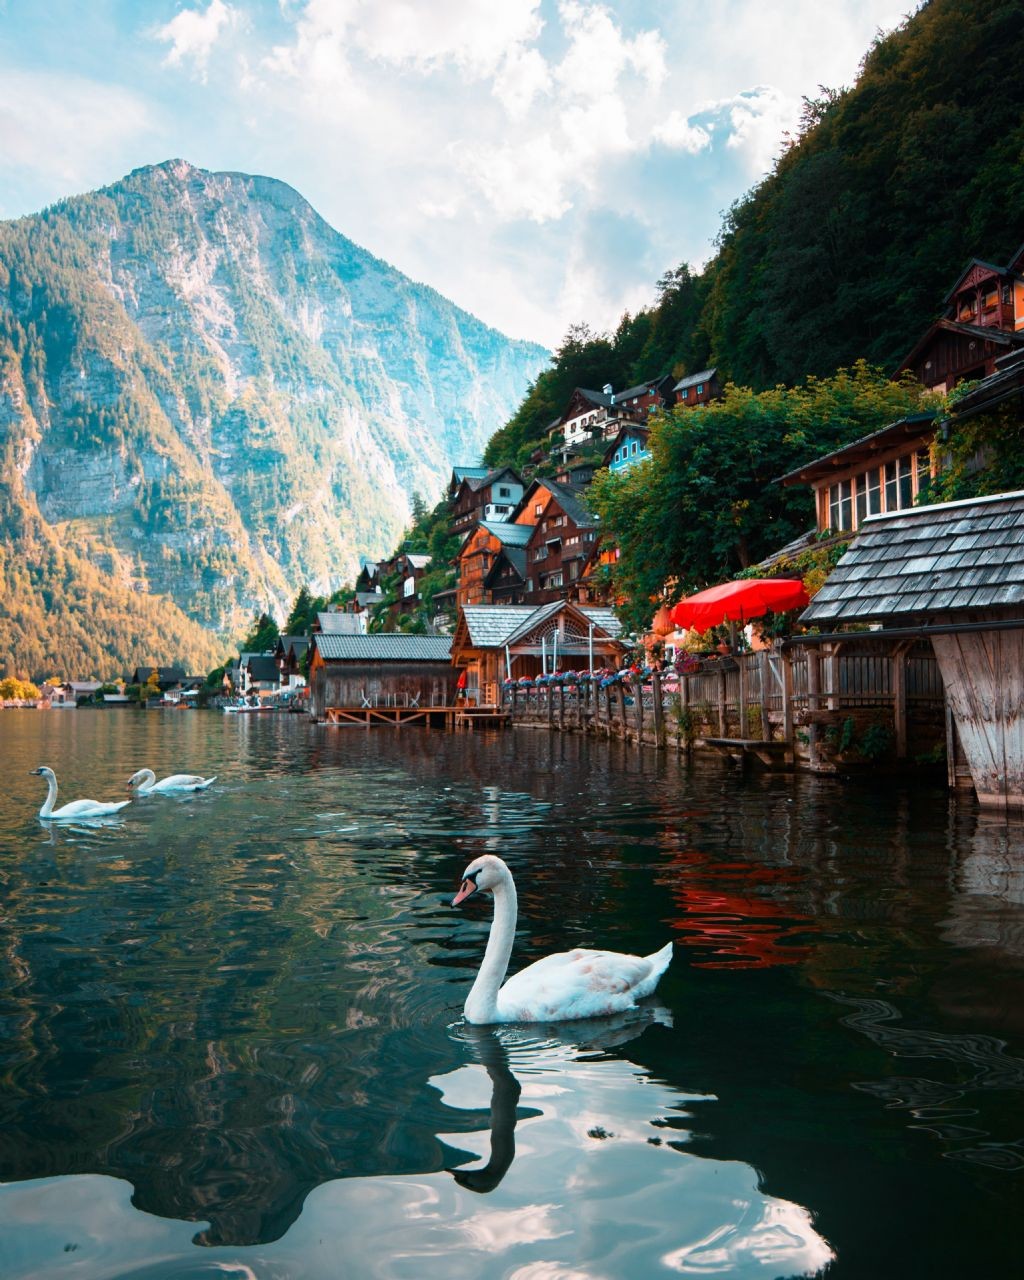 Hallstatt is a beautiful and unique destination that should be on every traveler's bucket list.